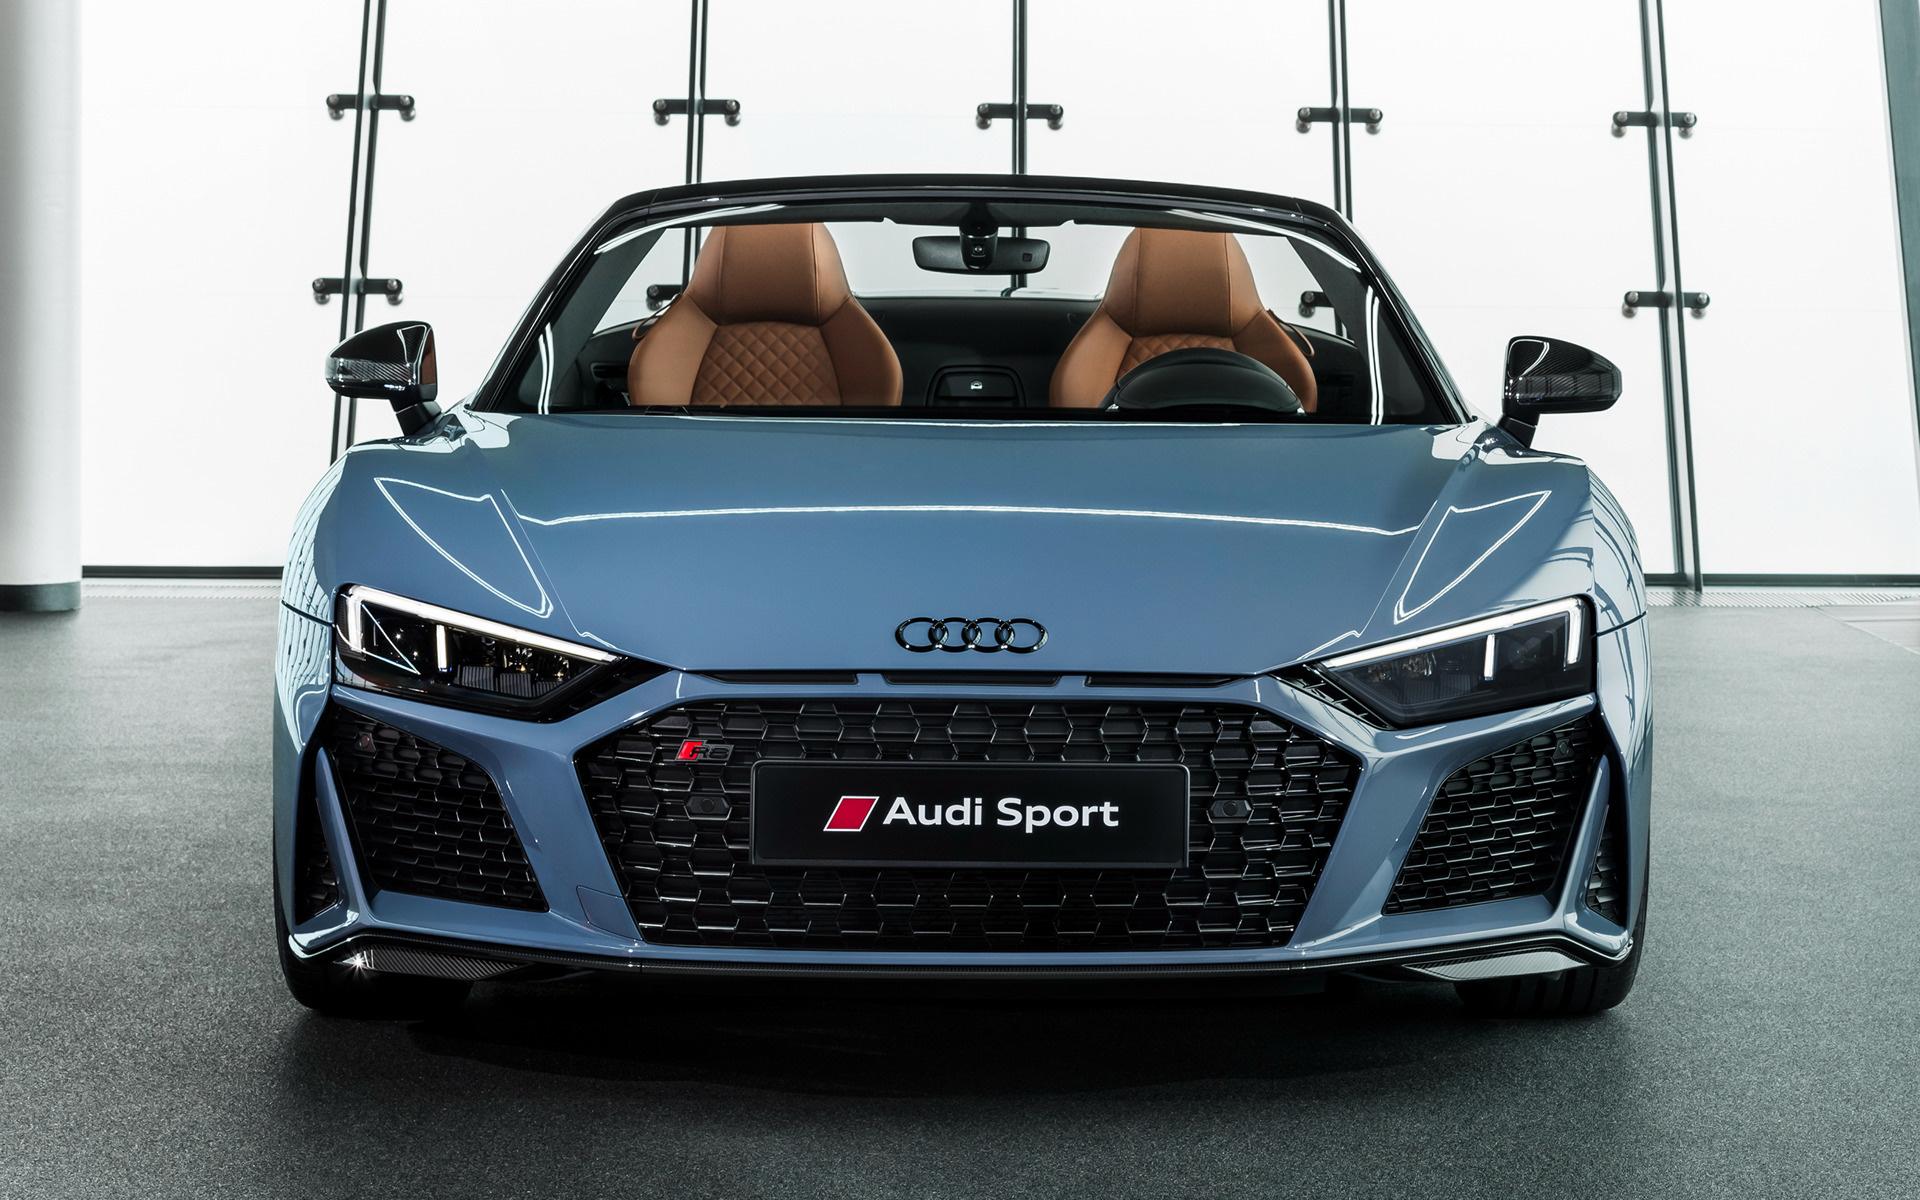 Audi R8 Spyder and HD Image